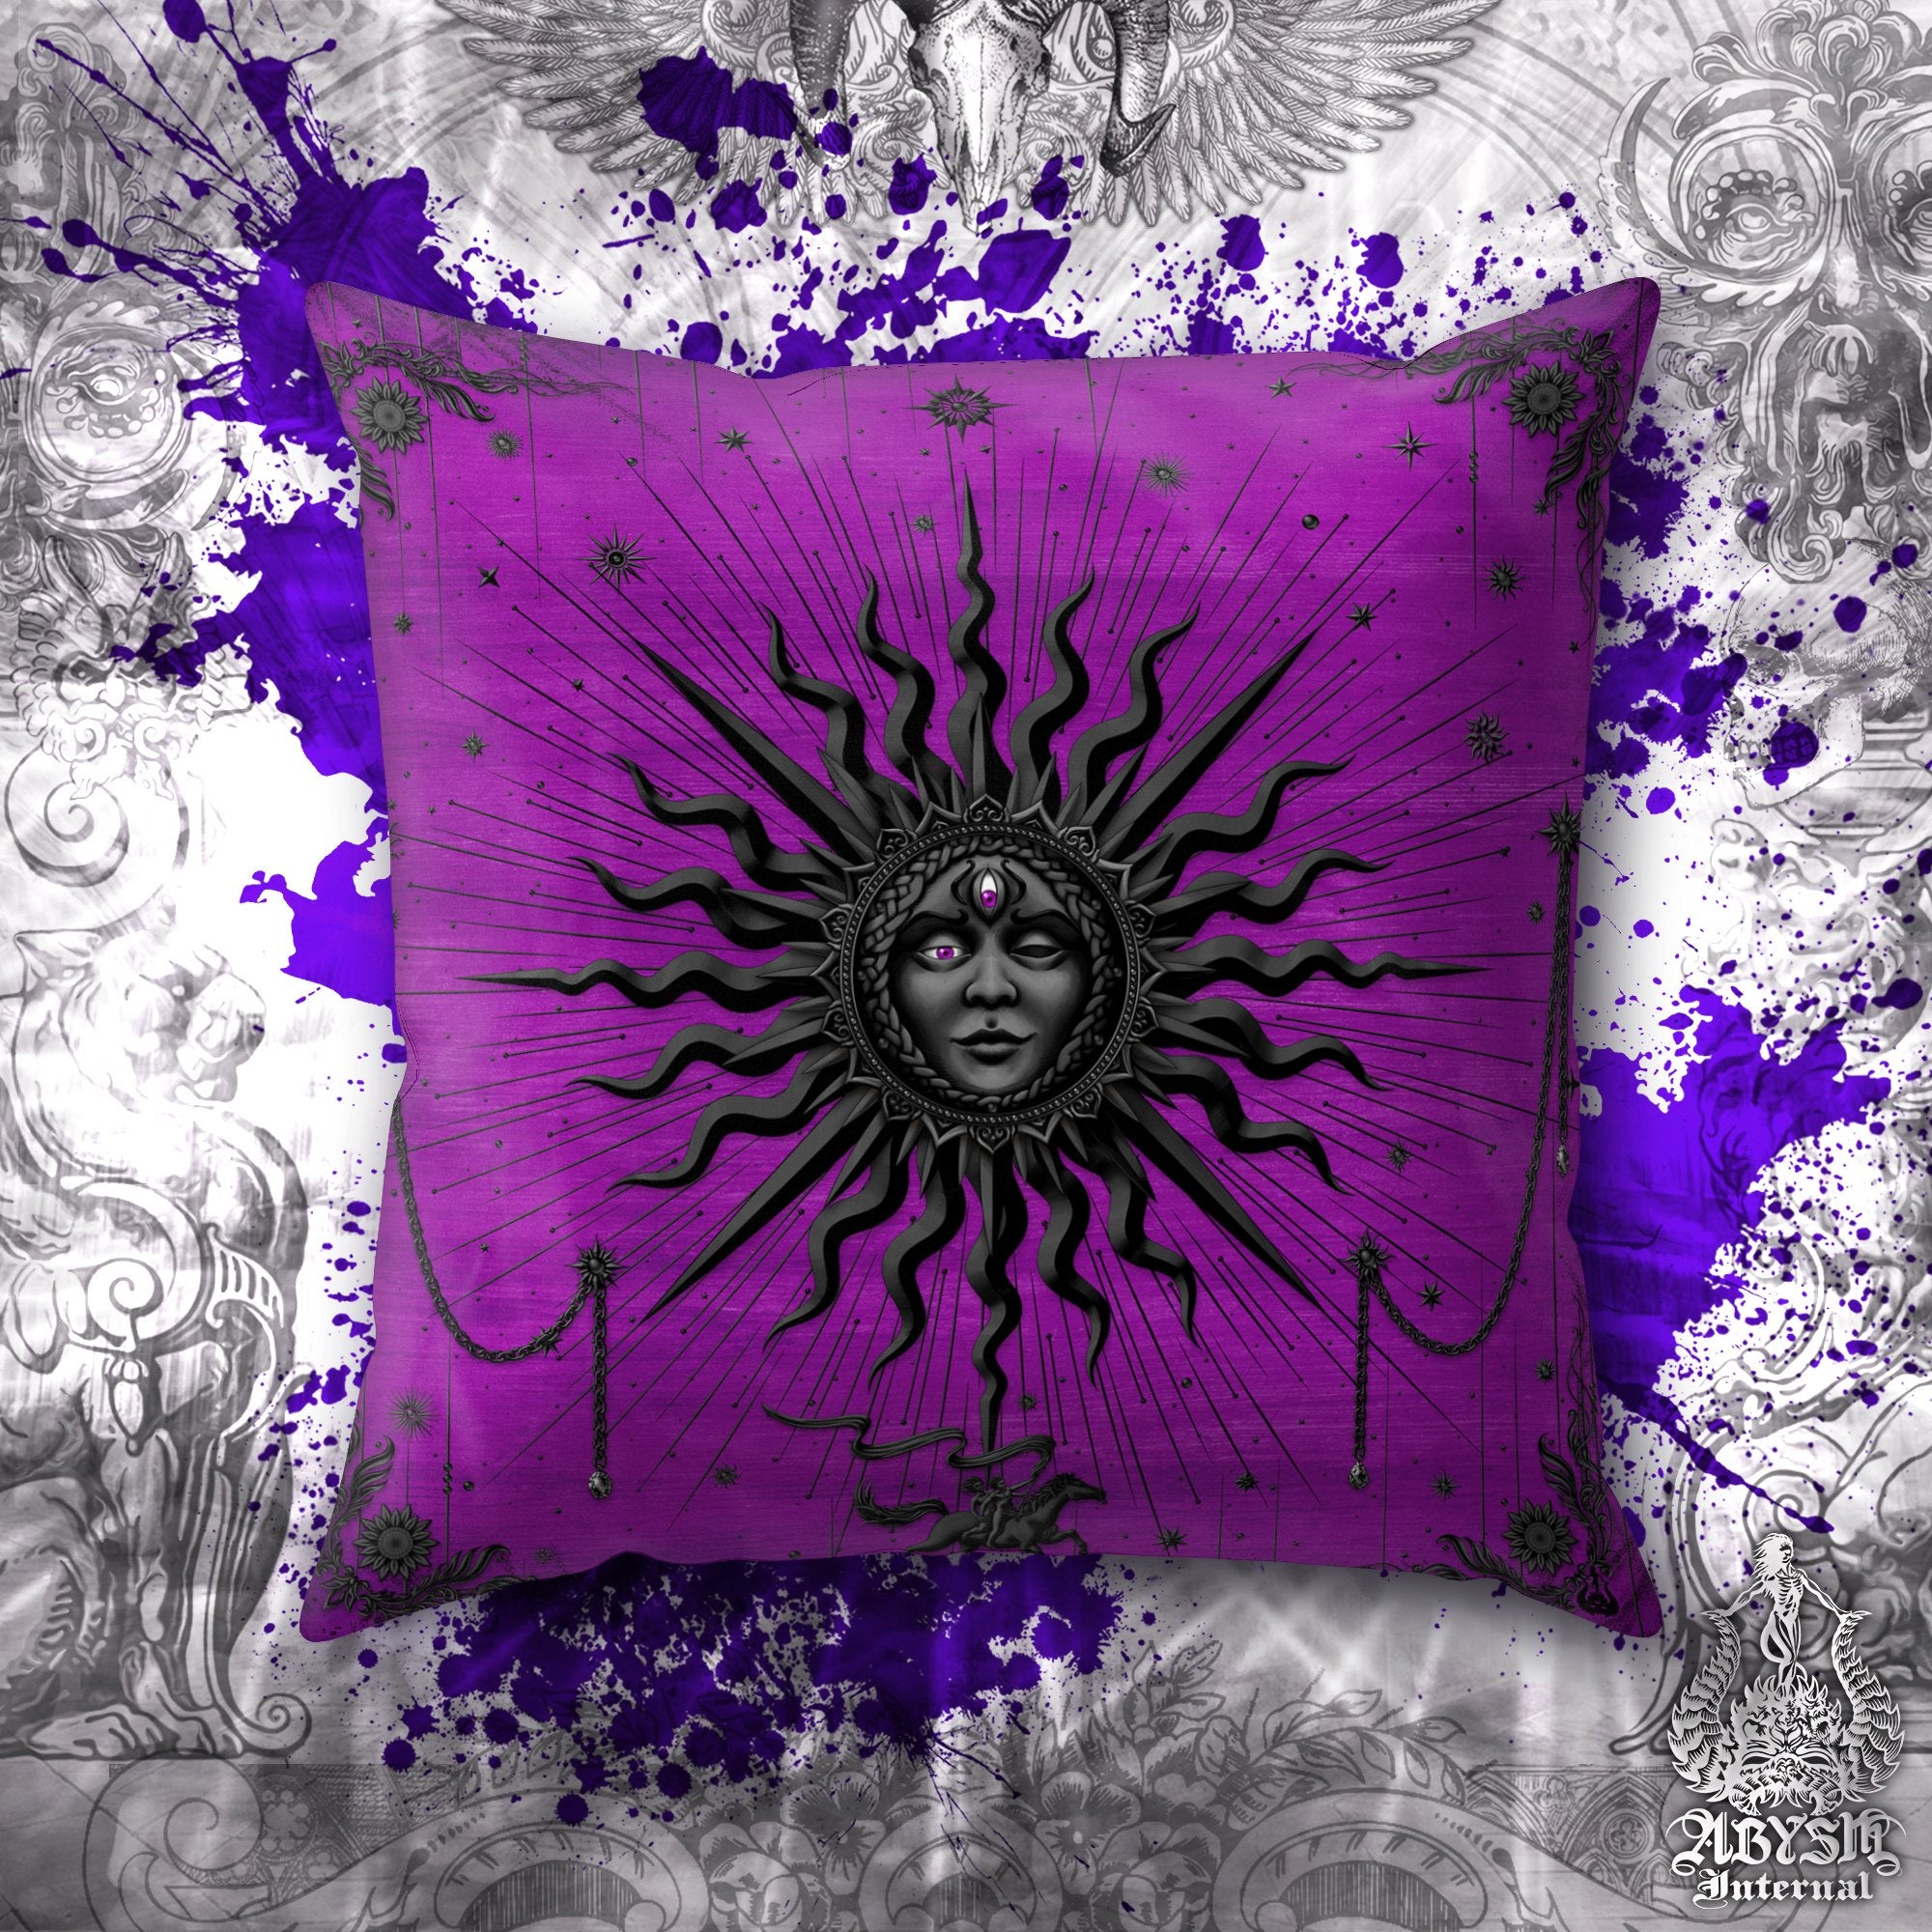 Pastel Goth Throw Pillow, Witchy Decorative Accent Pillow, Witch Square Cushion Cover, Black Sun, Arcana Tarot Art, Whimsigoth Home, Fortune & Magic Room Decor - Purple - Abysm Internal